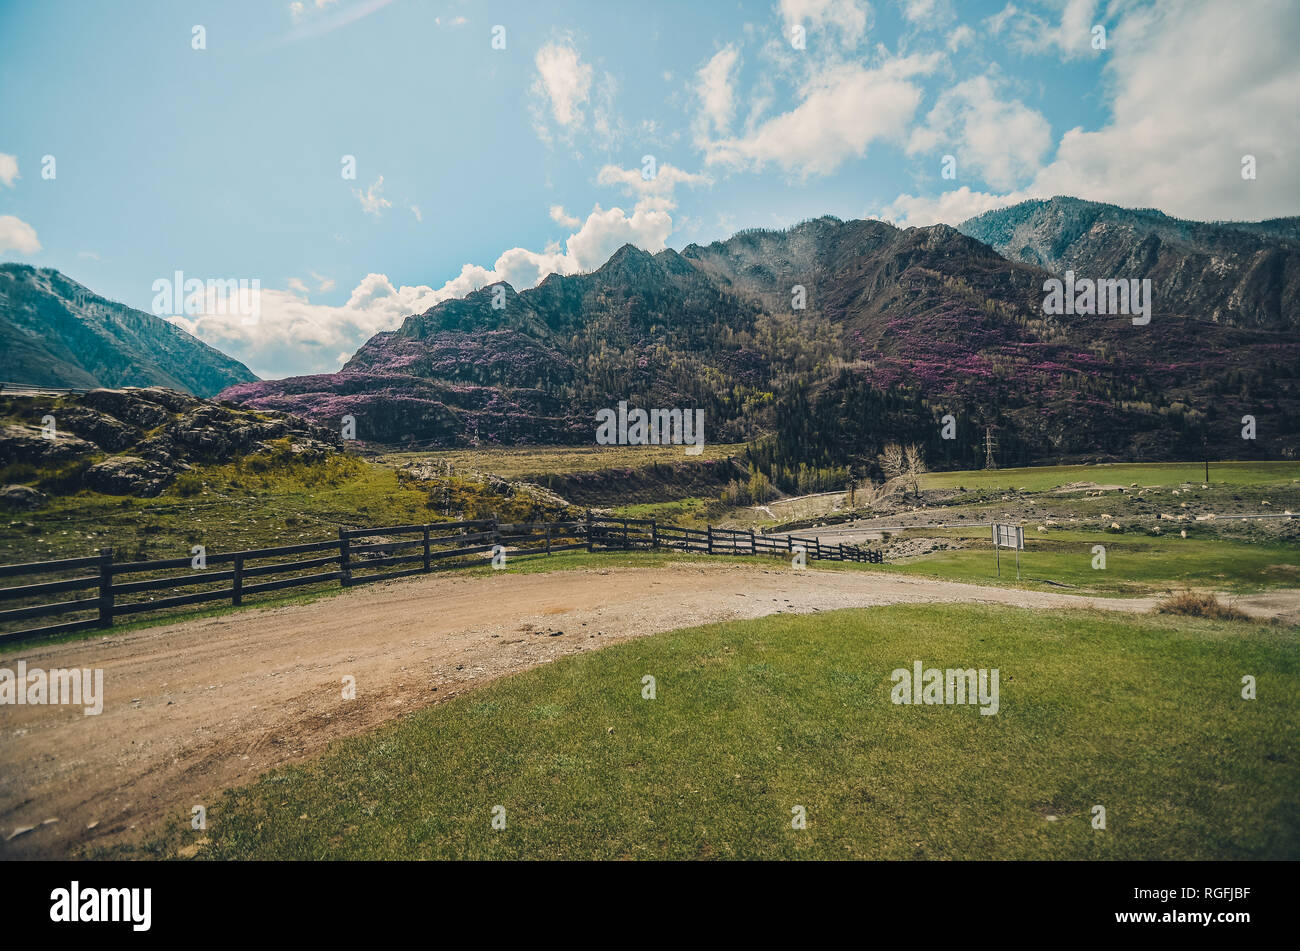 Mountain valley, beautiful landscape with an old road. Spring bloom in mountains Stock Photo